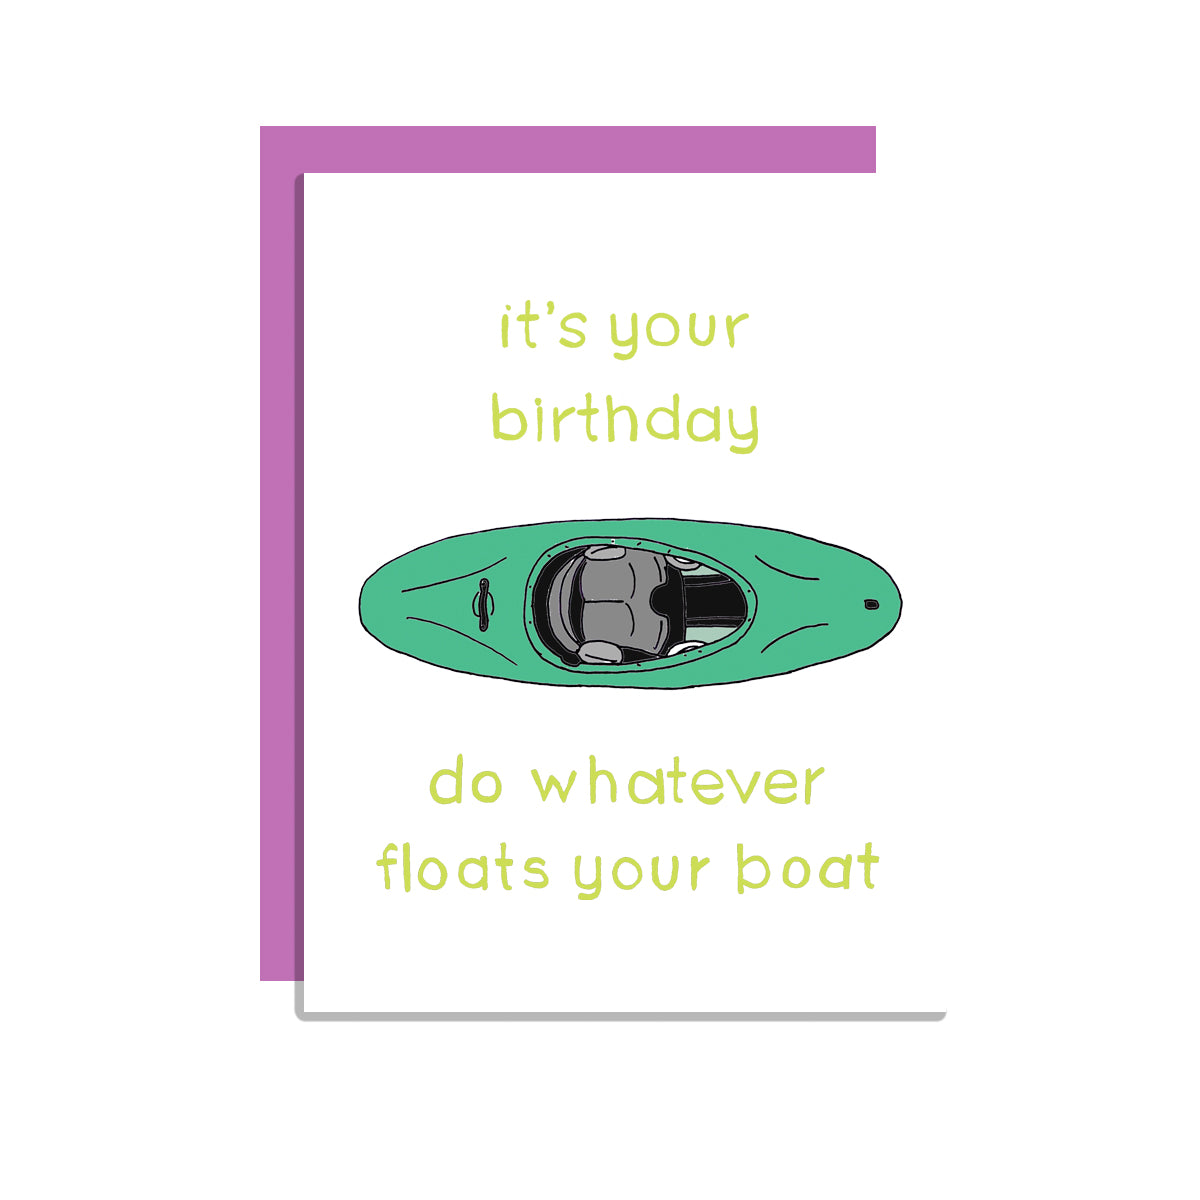 Floats Your Boat Card